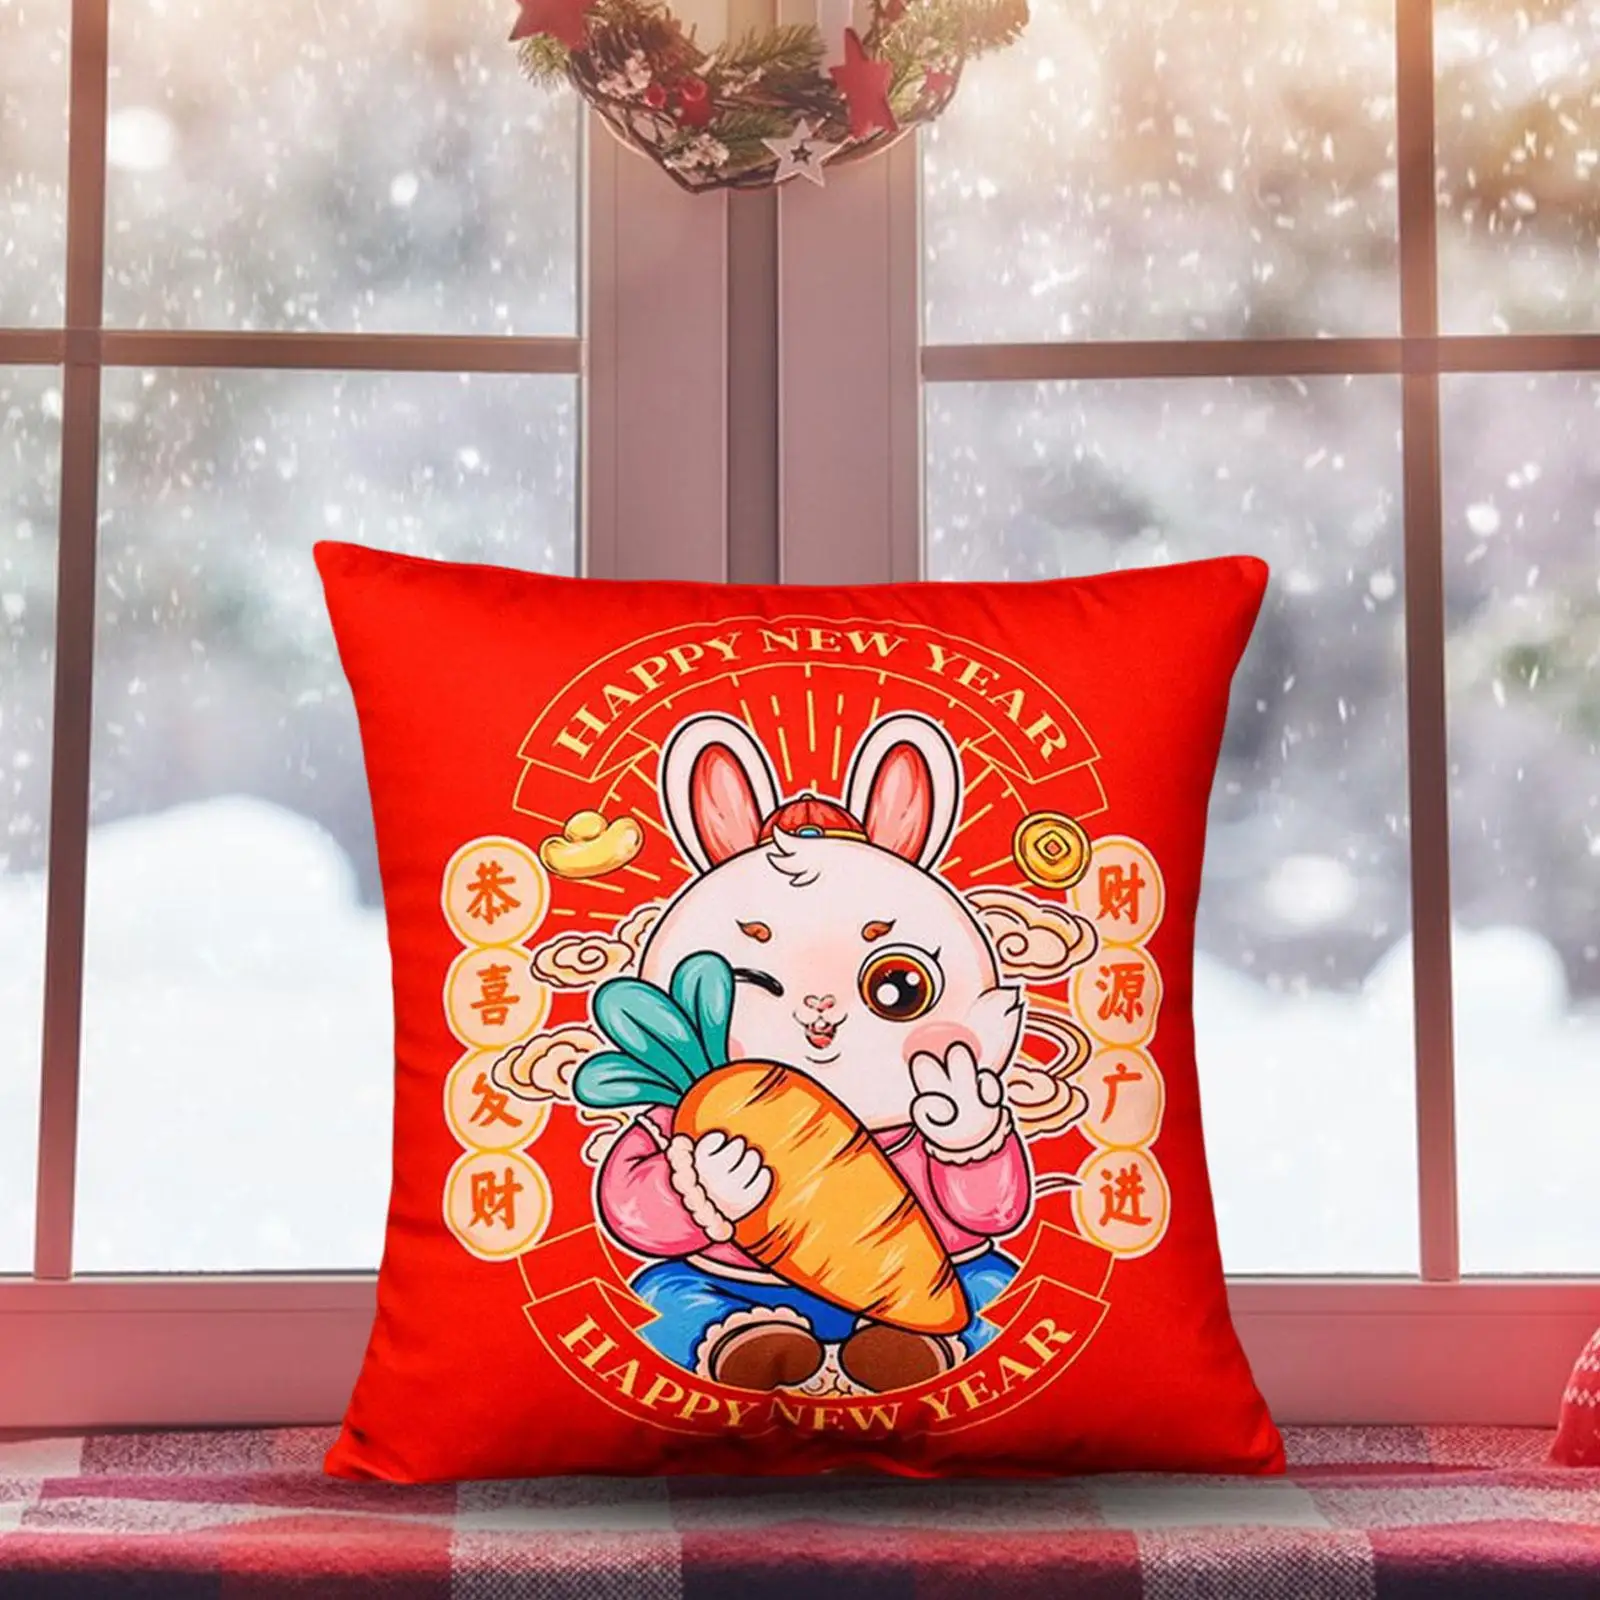 Sping Festival Sofa Pillow Home Decor with Pillow Inserts Breathable Decorative 40cm Cushion for Bedroom Chair Patio Office Bed